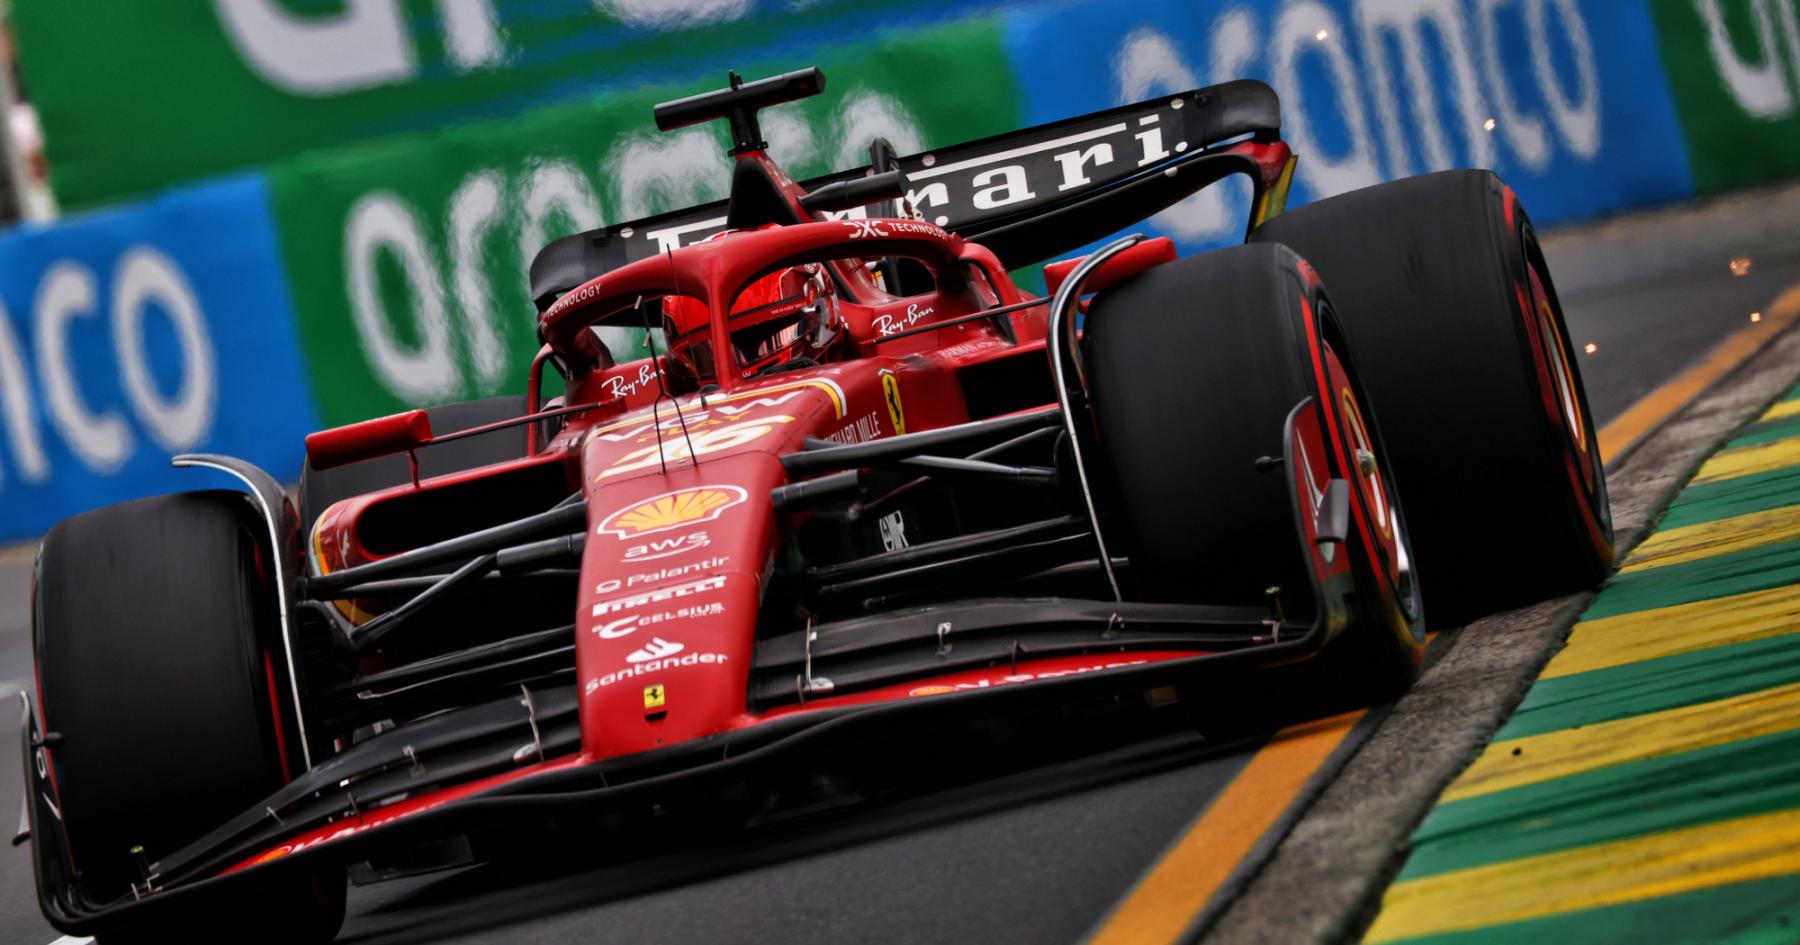 Leclerc's Strategic Triumph: Defying Qualifying Odds to Secure Victory